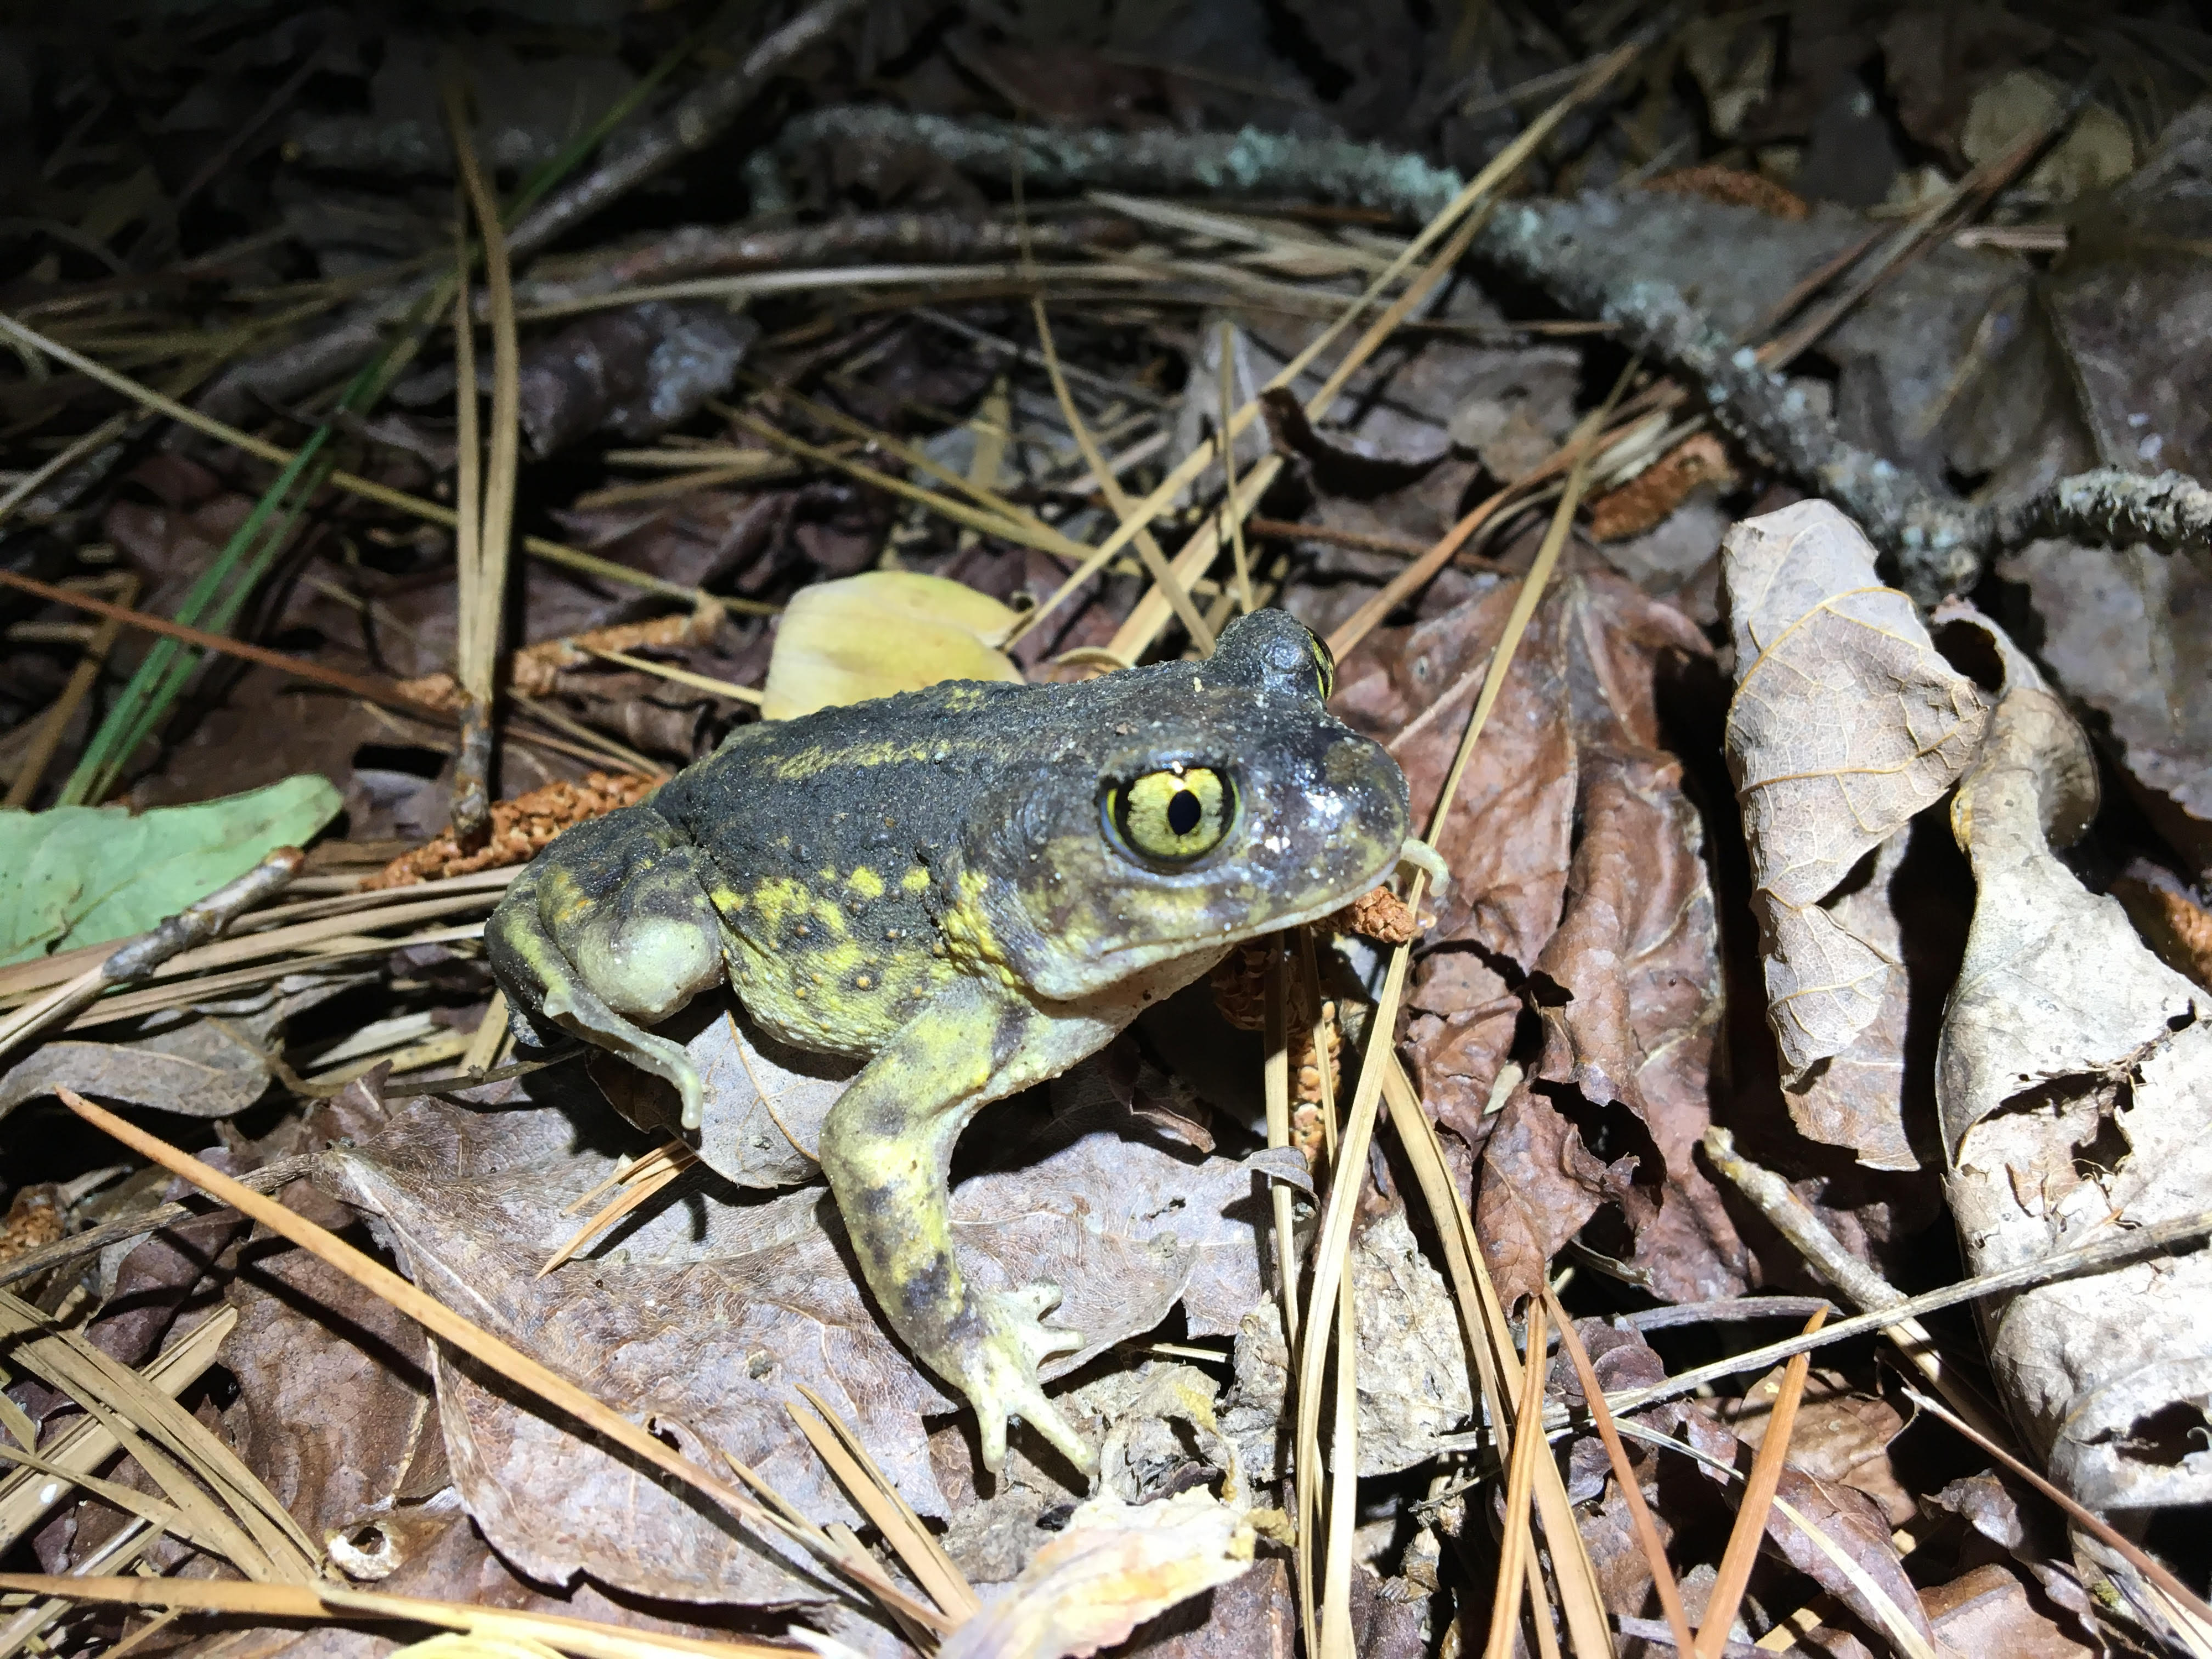 The sounds of scaphiopus holbrookii, commonly known as the eastern spadefoot